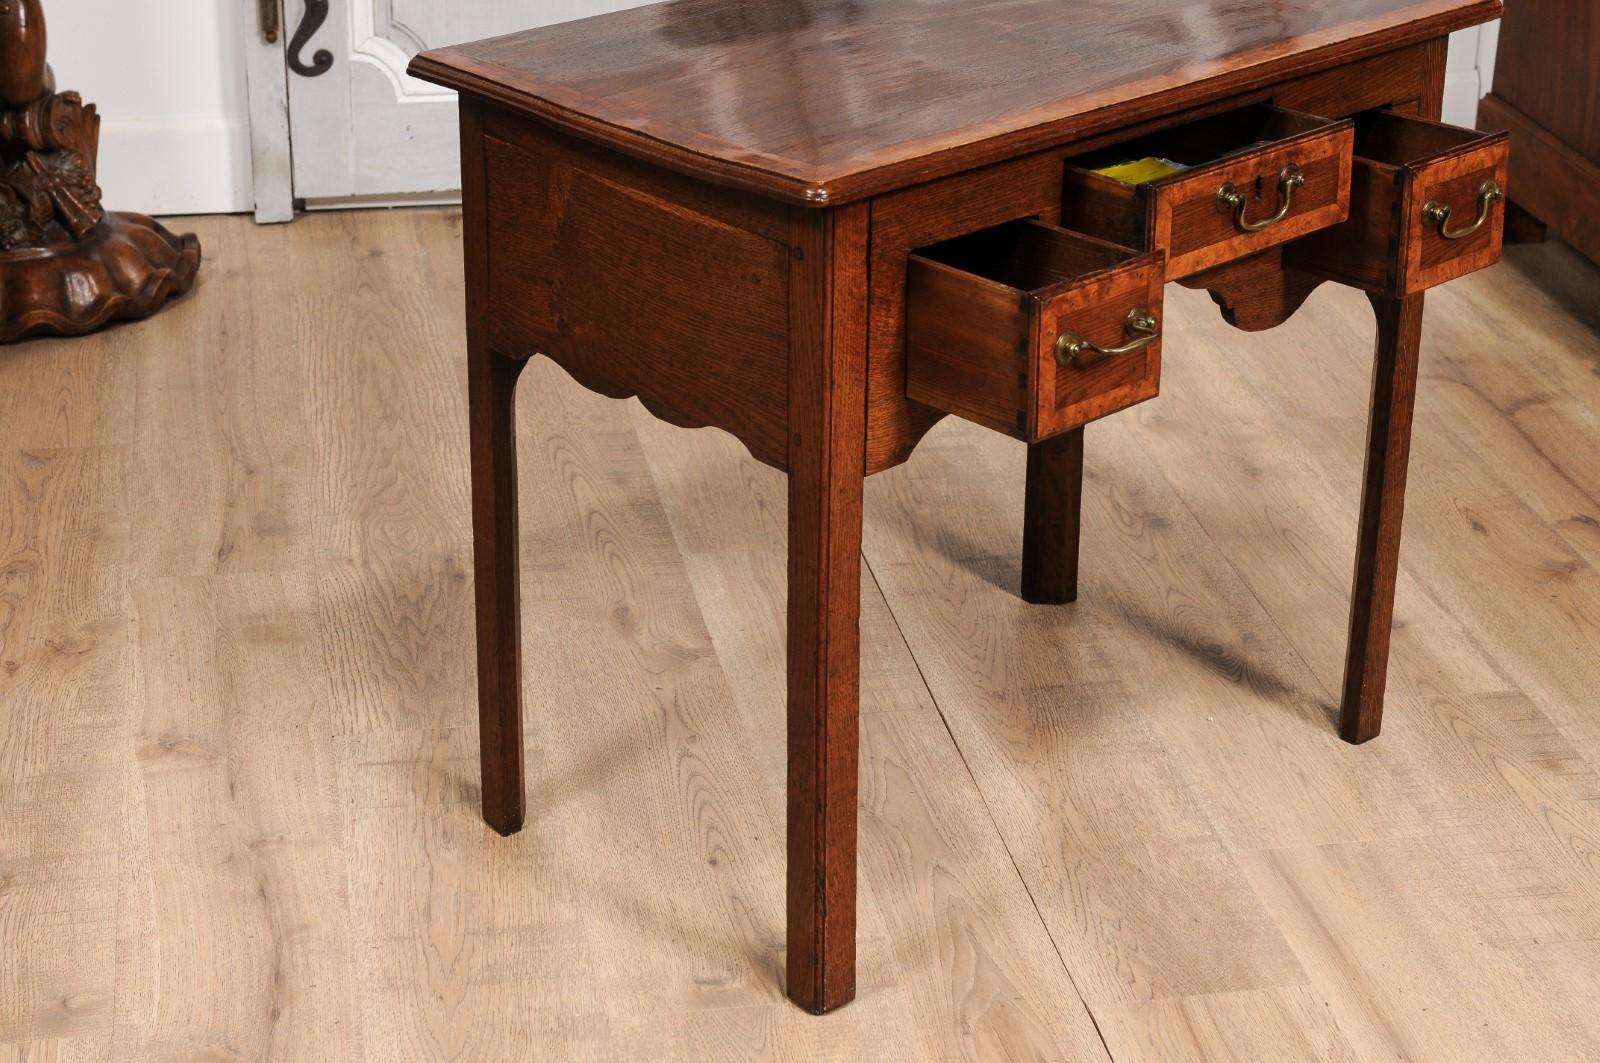 English Georgian Period 18th Century Oak Lowboy Side Table with Carved Apron For Sale 1